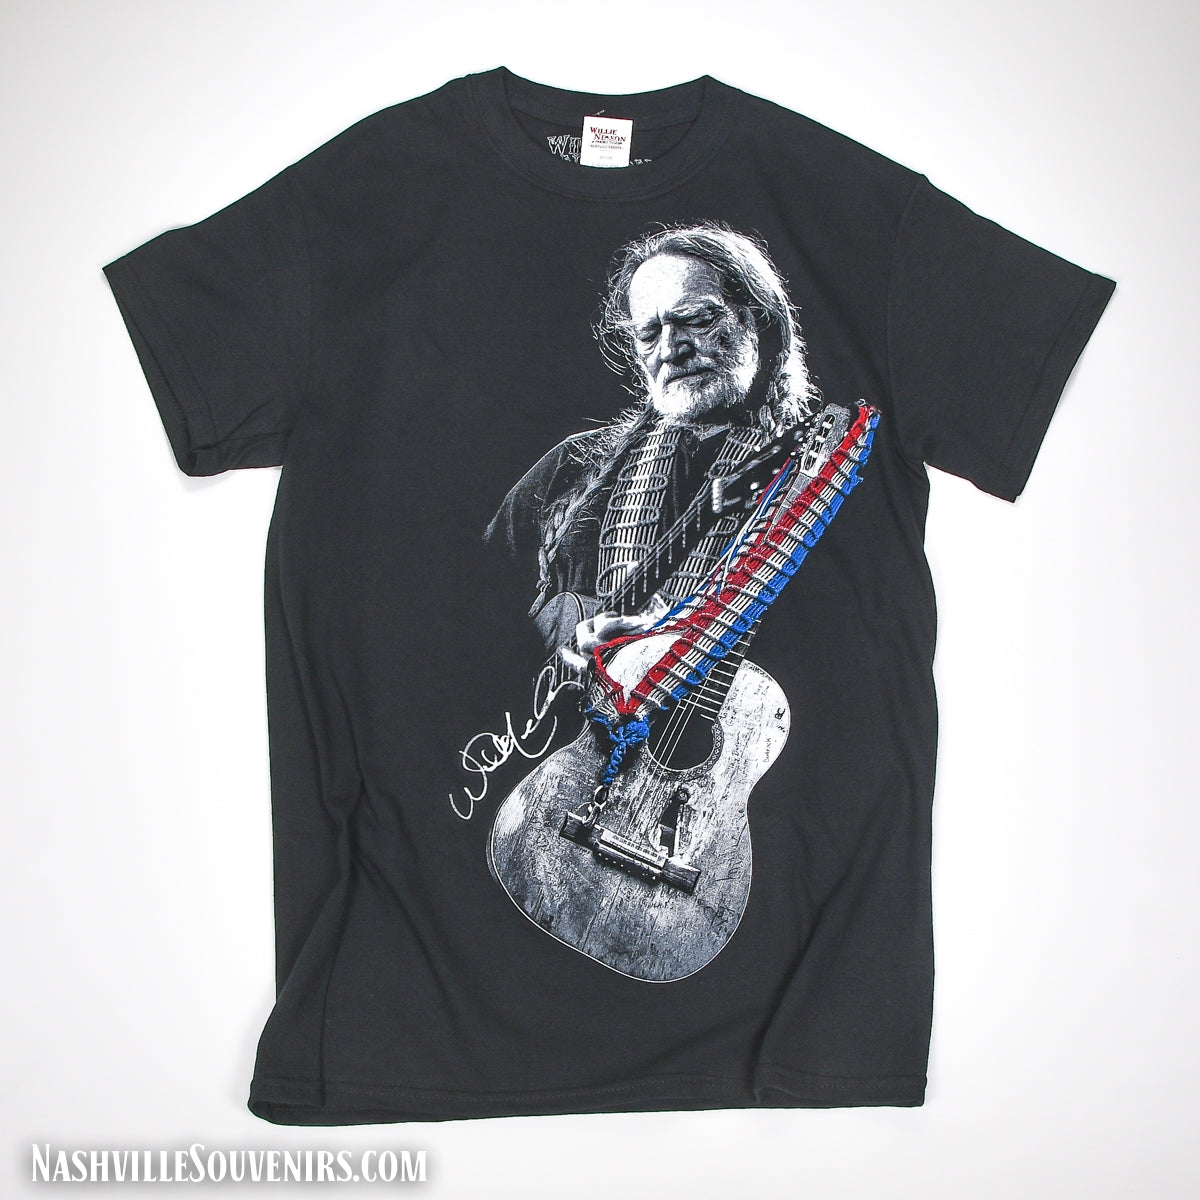 "Willie Nelson Playing Trigger" Unisex T-shirt